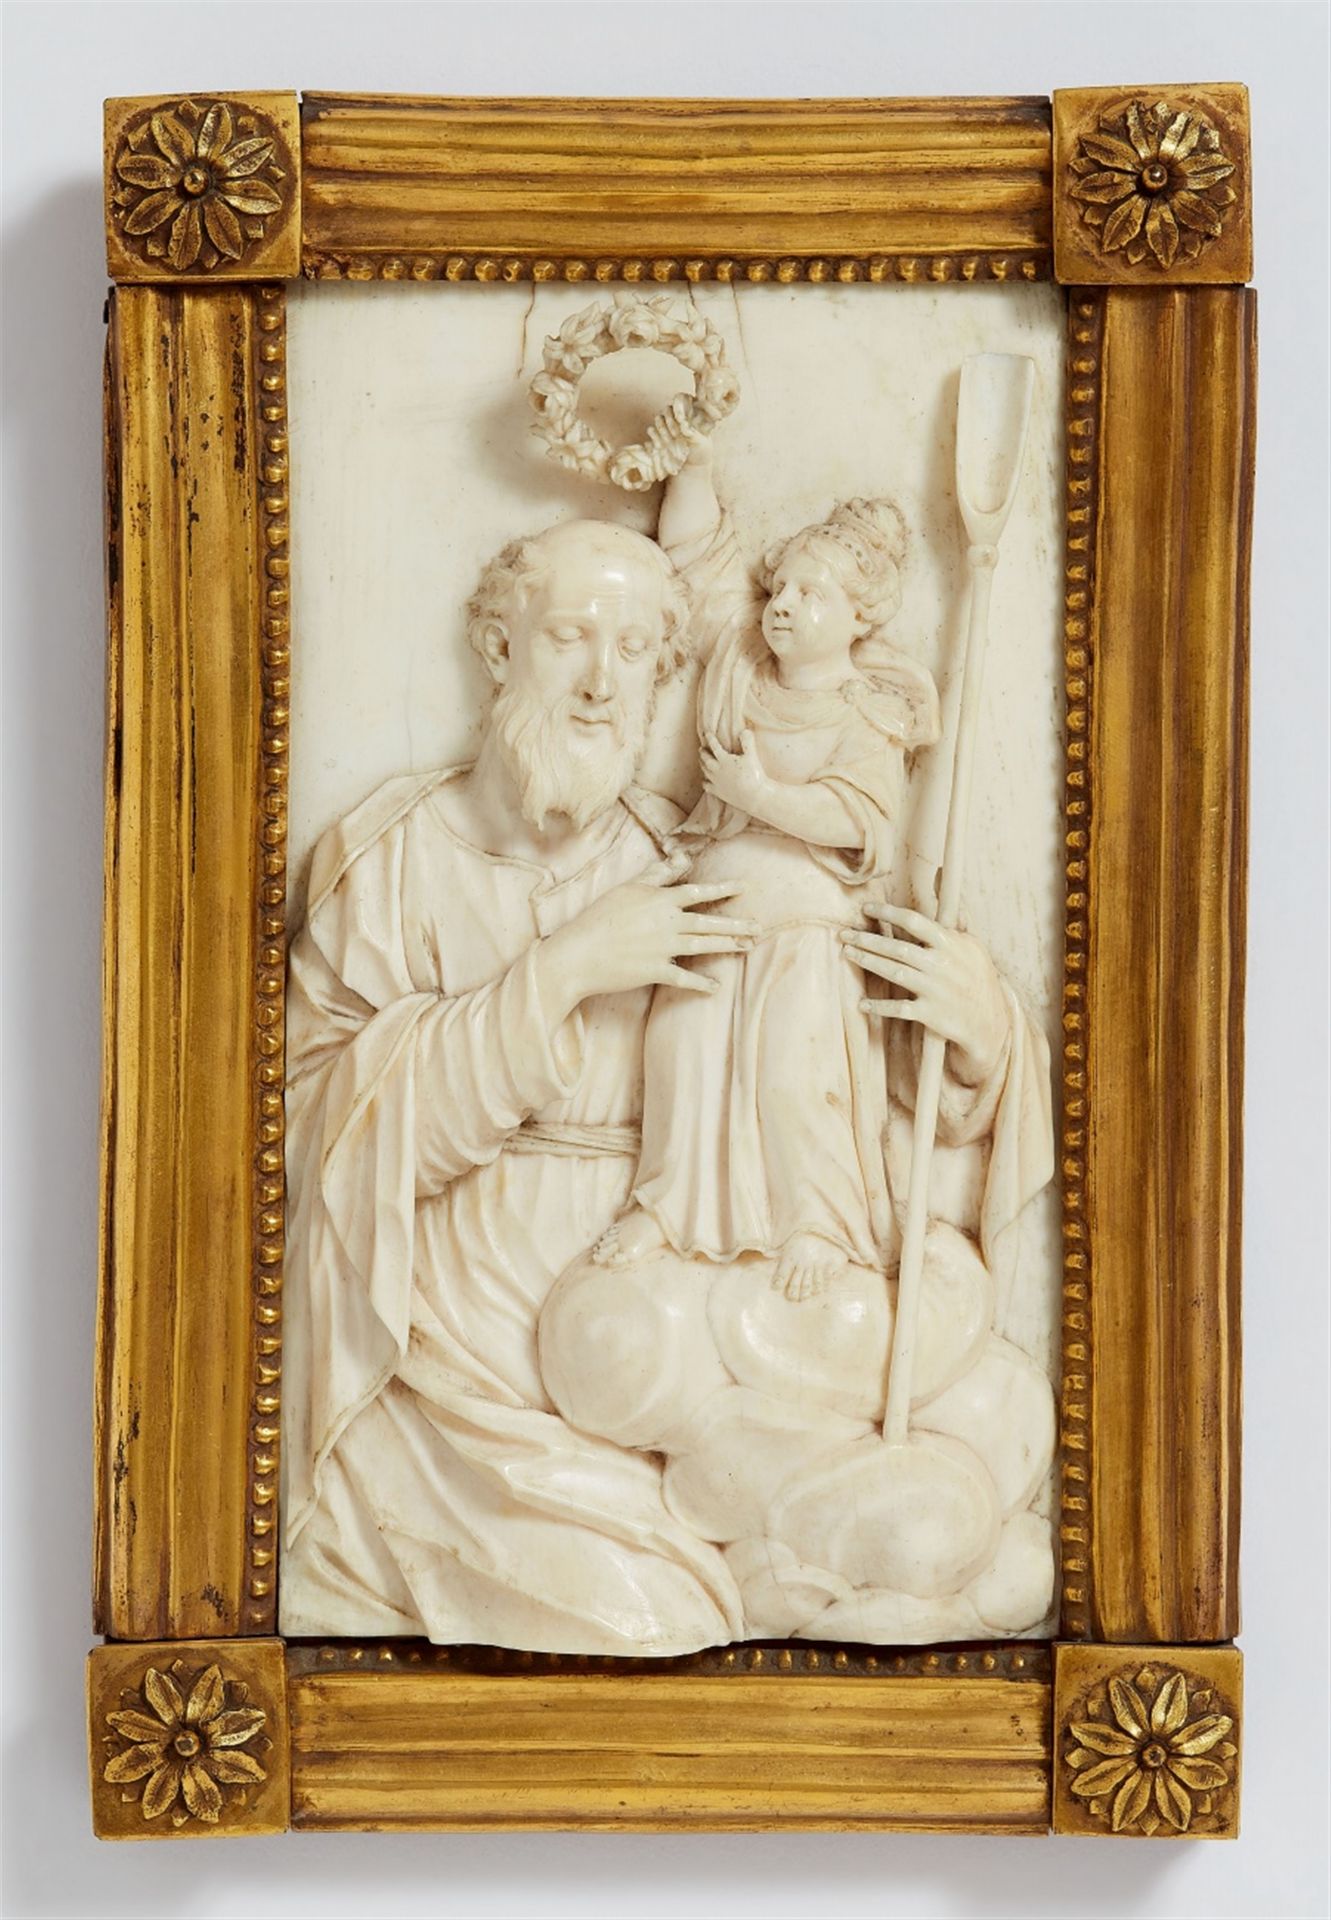 A late 17th century Dutch carved ivory figure of Saint Joachim crowned by the Virgin Mary